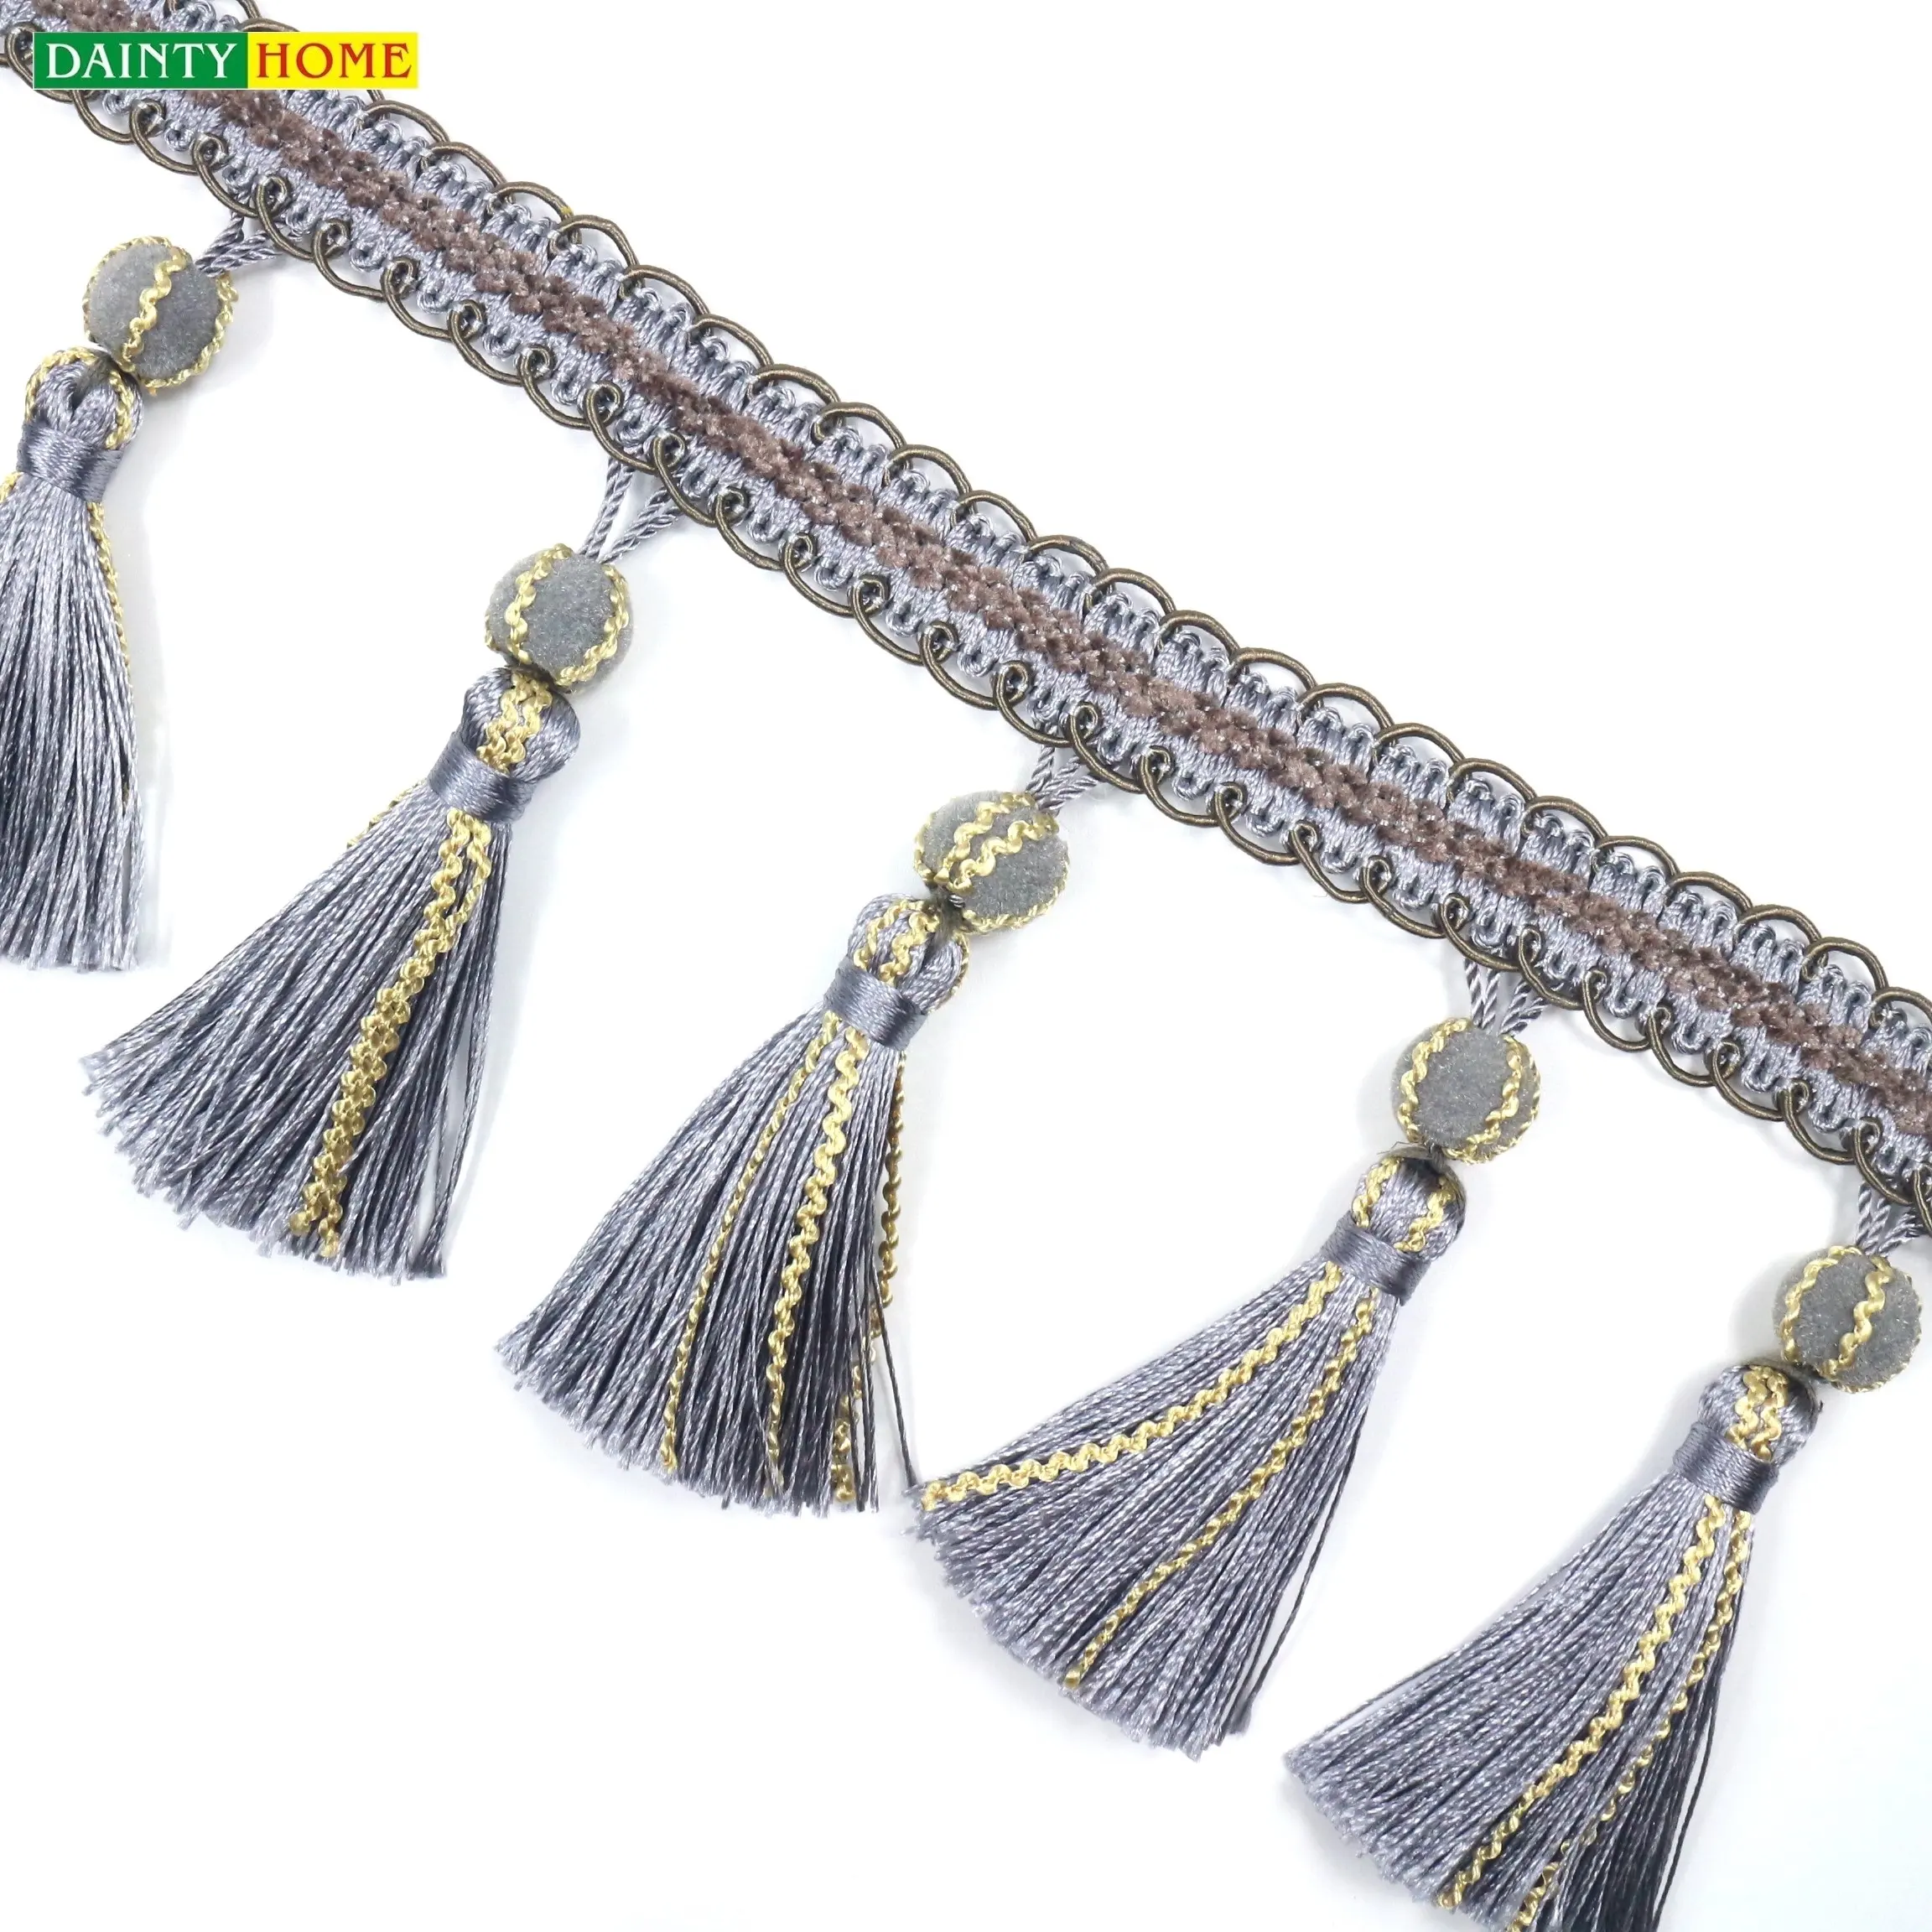 Fringes And Trims China Style Decorative Trim Multi Color 12cm Width Fringes Trim Indian Home Decor Curtain Crafting